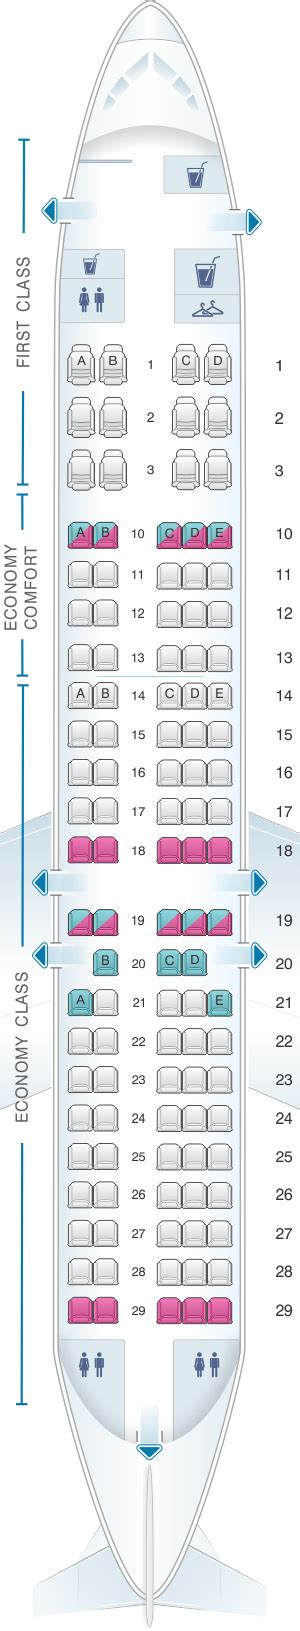 Delta seats map. The seating map of the Delta Boeing 767 shows the Economy section sports 165 standard seats. The exit is behind seats 20A, 20B, 20F, and 20G, which offer limited reclining. These seats are also reserved as preferred seats for Delta Medallion members but are available to passengers during check-in. Seats 21A, ... 